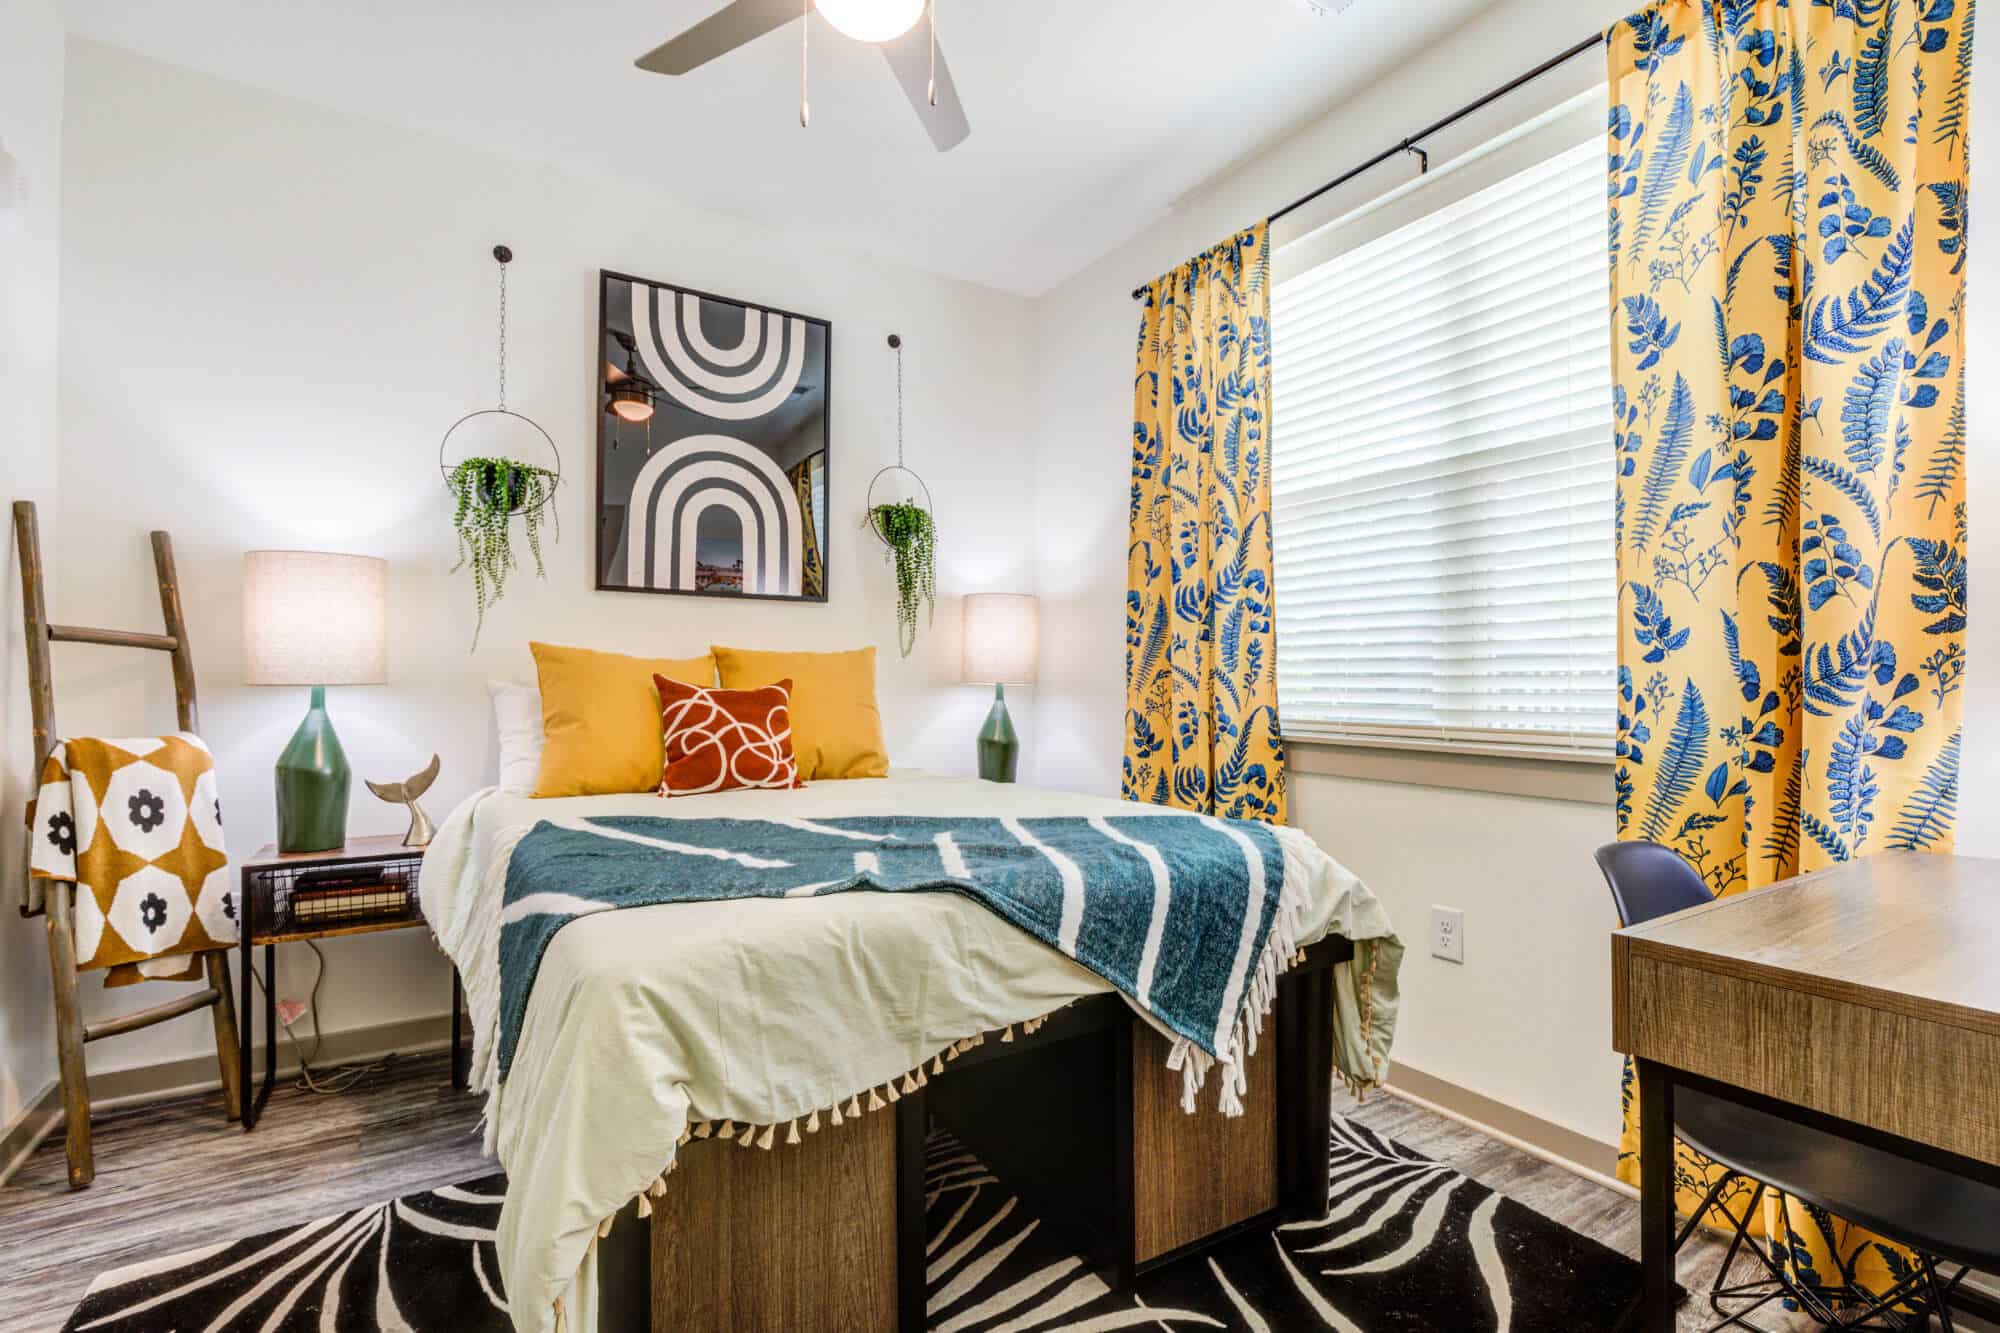 signature hartwell village off campus apartments near clemson university fully furnished private bedrooms